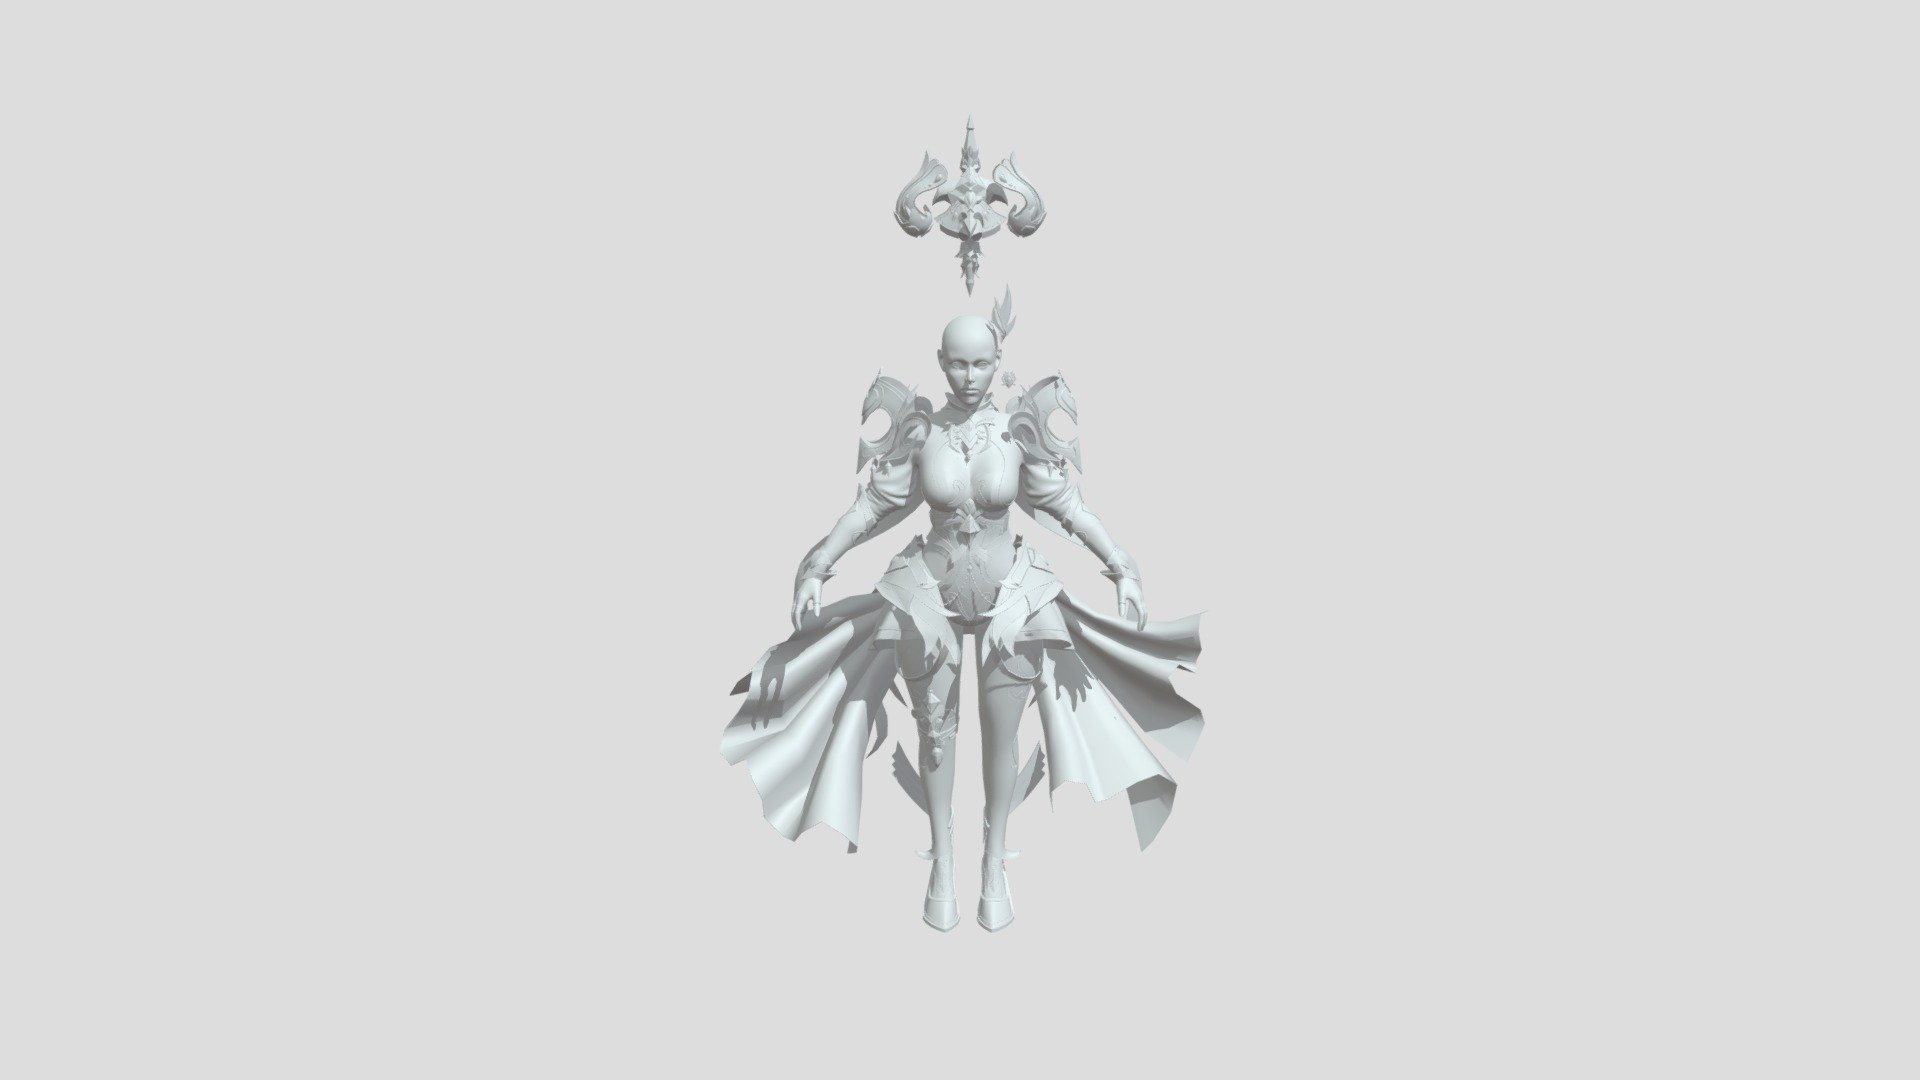 My name is Duy Dat, I come from Vietnam. I am a 3D artist and I want to find freelance work in 3D art. I hope to work with you. This is a character that I make in my free time. If you want I can edit it however you like. Thank you for your interest in my products - Green Skirt Killer Goddess - 3D model by nguyenduydat 3d model